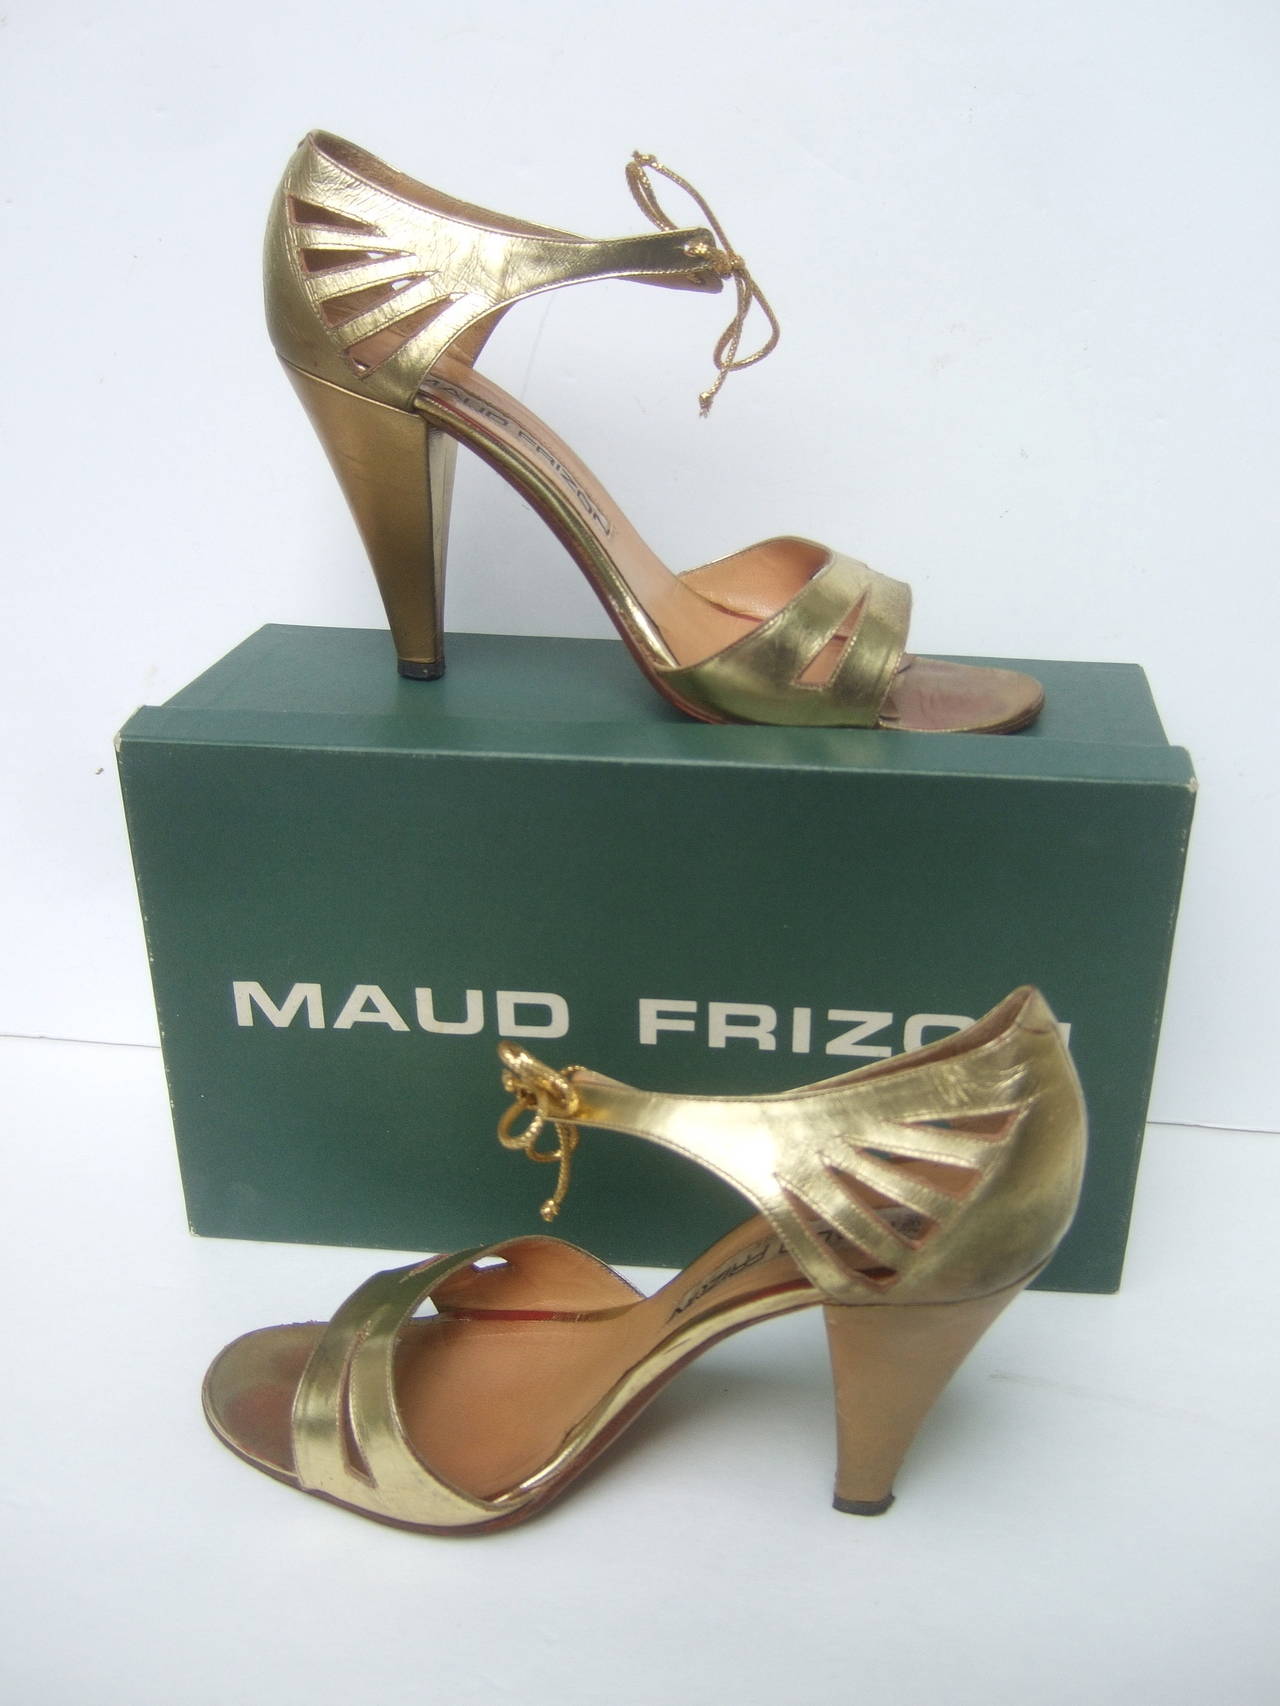 Maud Frizon Paris Gold Leather Strappy Heels Made in Italy Size 37 1/2 1